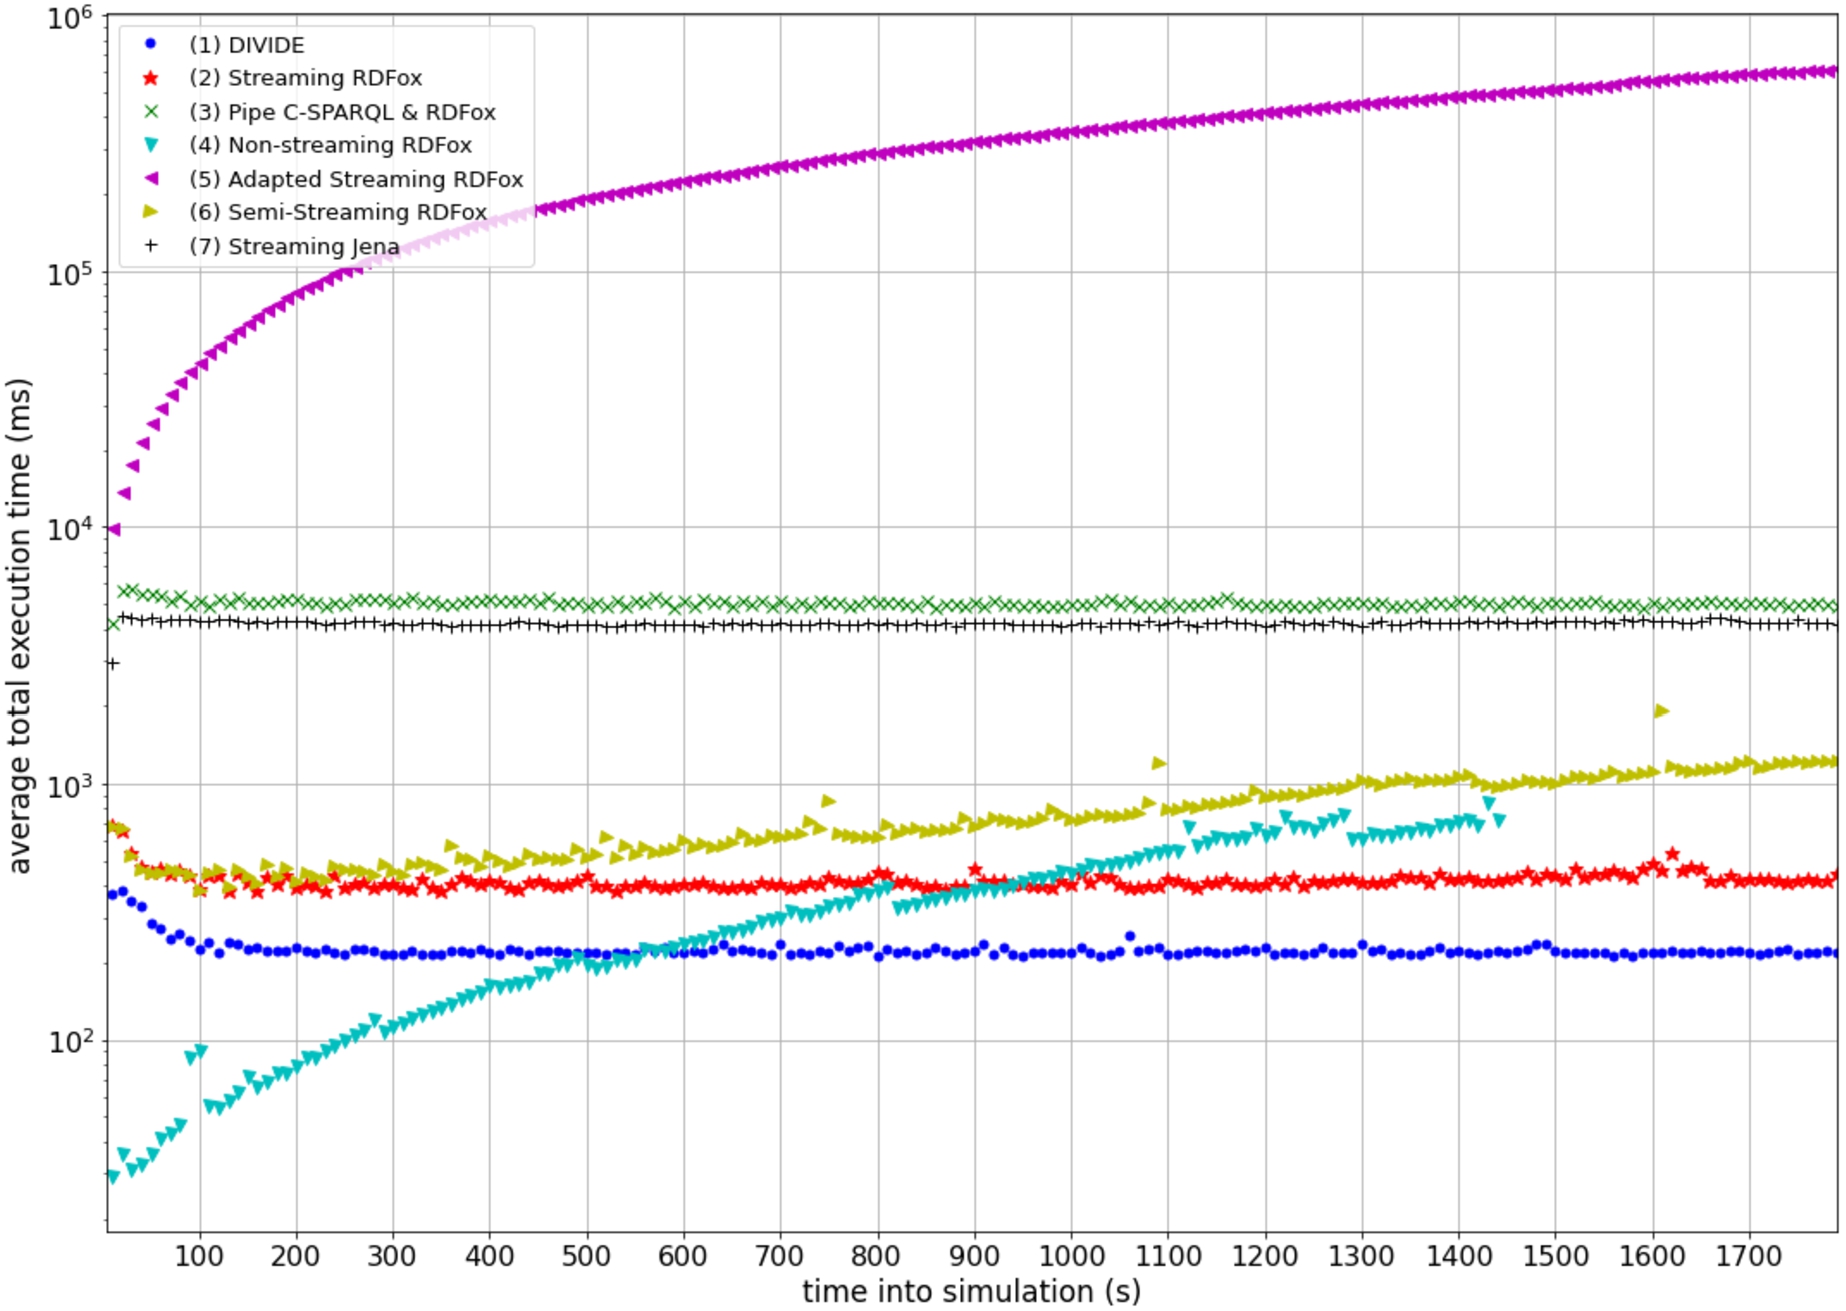 Results of the comparison of the DIVIDE real-time query evaluation approach with real-time reasoning approaches, for the brushing teeth query. For each evaluation set-up, the results show the evolution over time of the total execution time from the generated event (either a windowed event in a streaming set-up or an incoming event in a non-streaming set-up) until the routine activity prediction as output of the final query. For all set-ups, measurements are shown for the processed event, either incoming or windowed, at every 10 seconds. All plotted execution times are averaged over the evaluation runs.